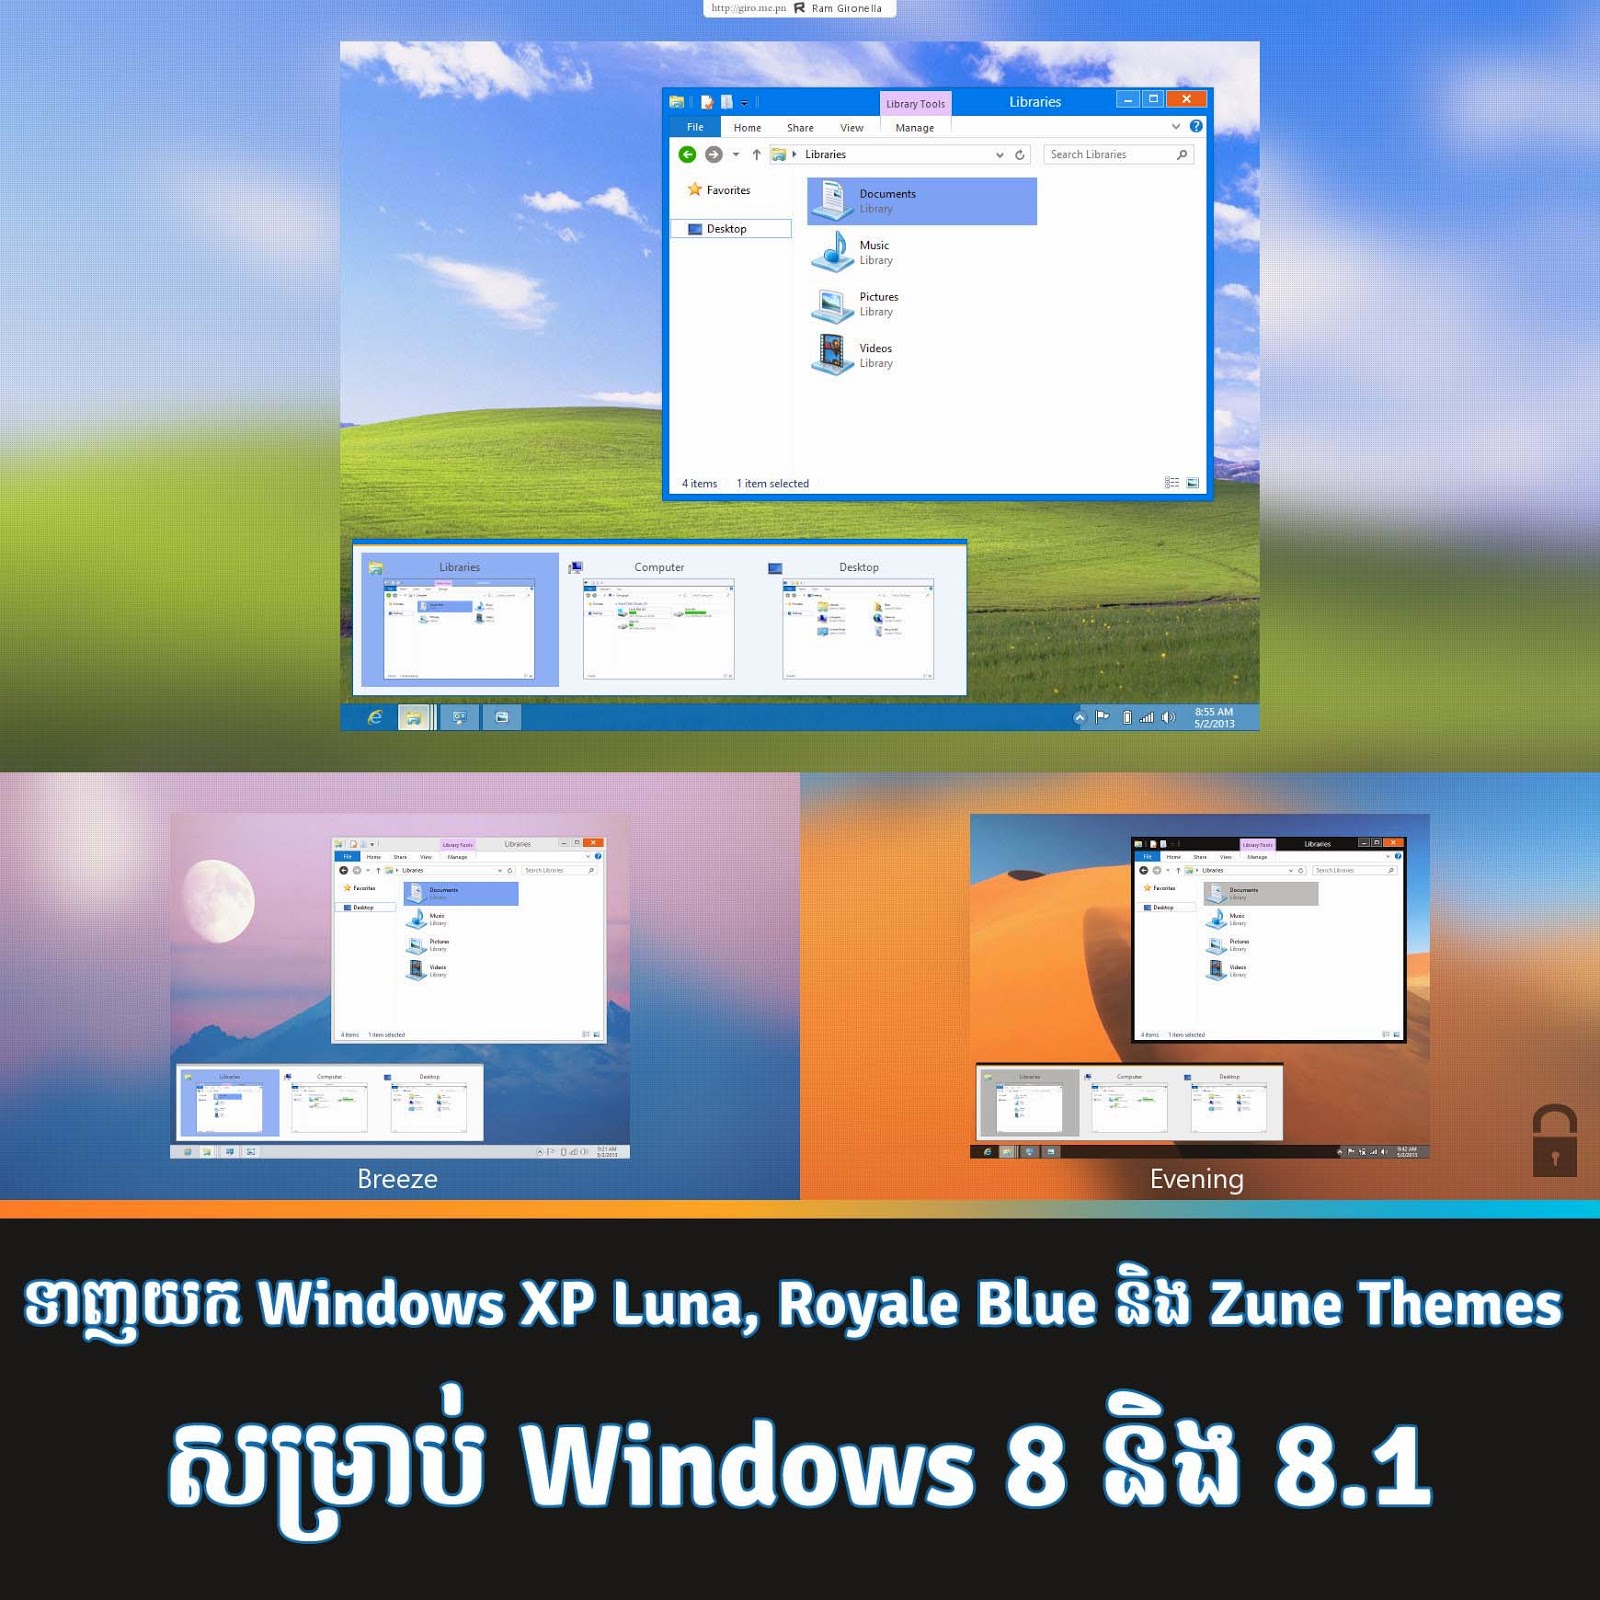 Jarvis Windows 7 Sounds Pack Free Download